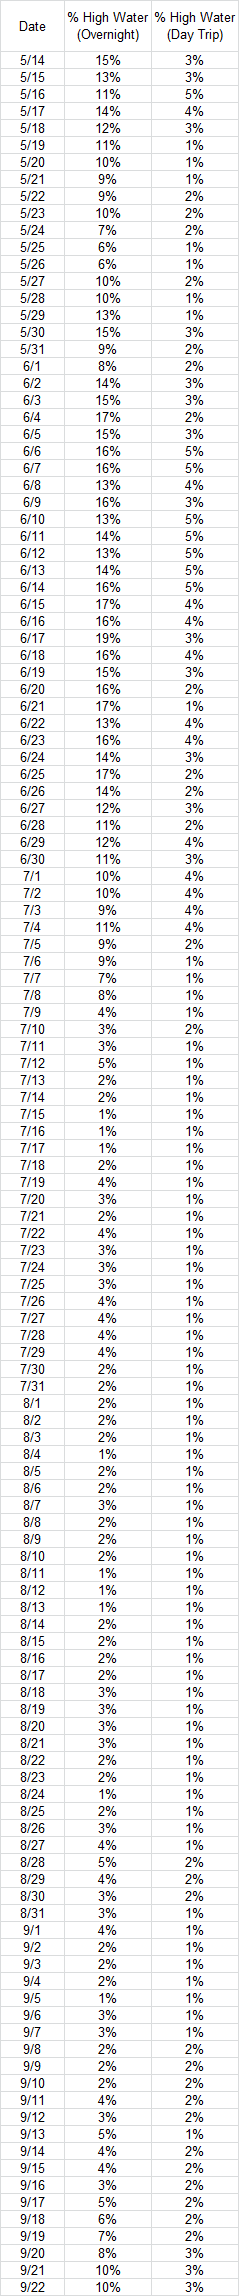 High water odds in table form